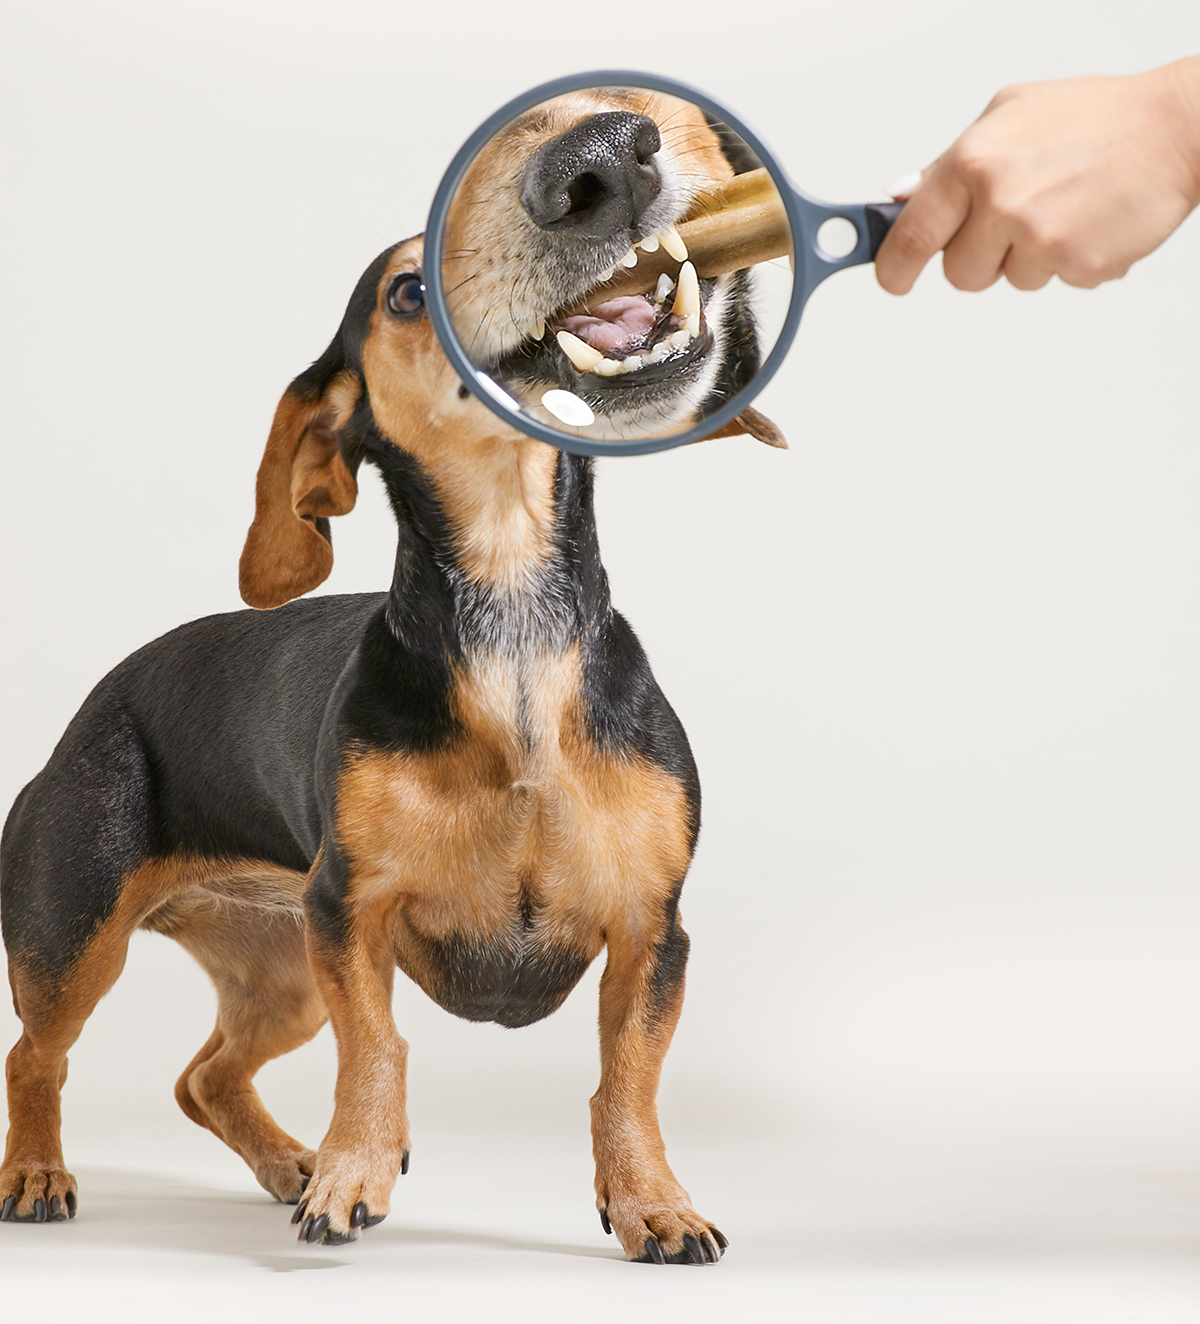 image of dachshund teeth under magnifying glass